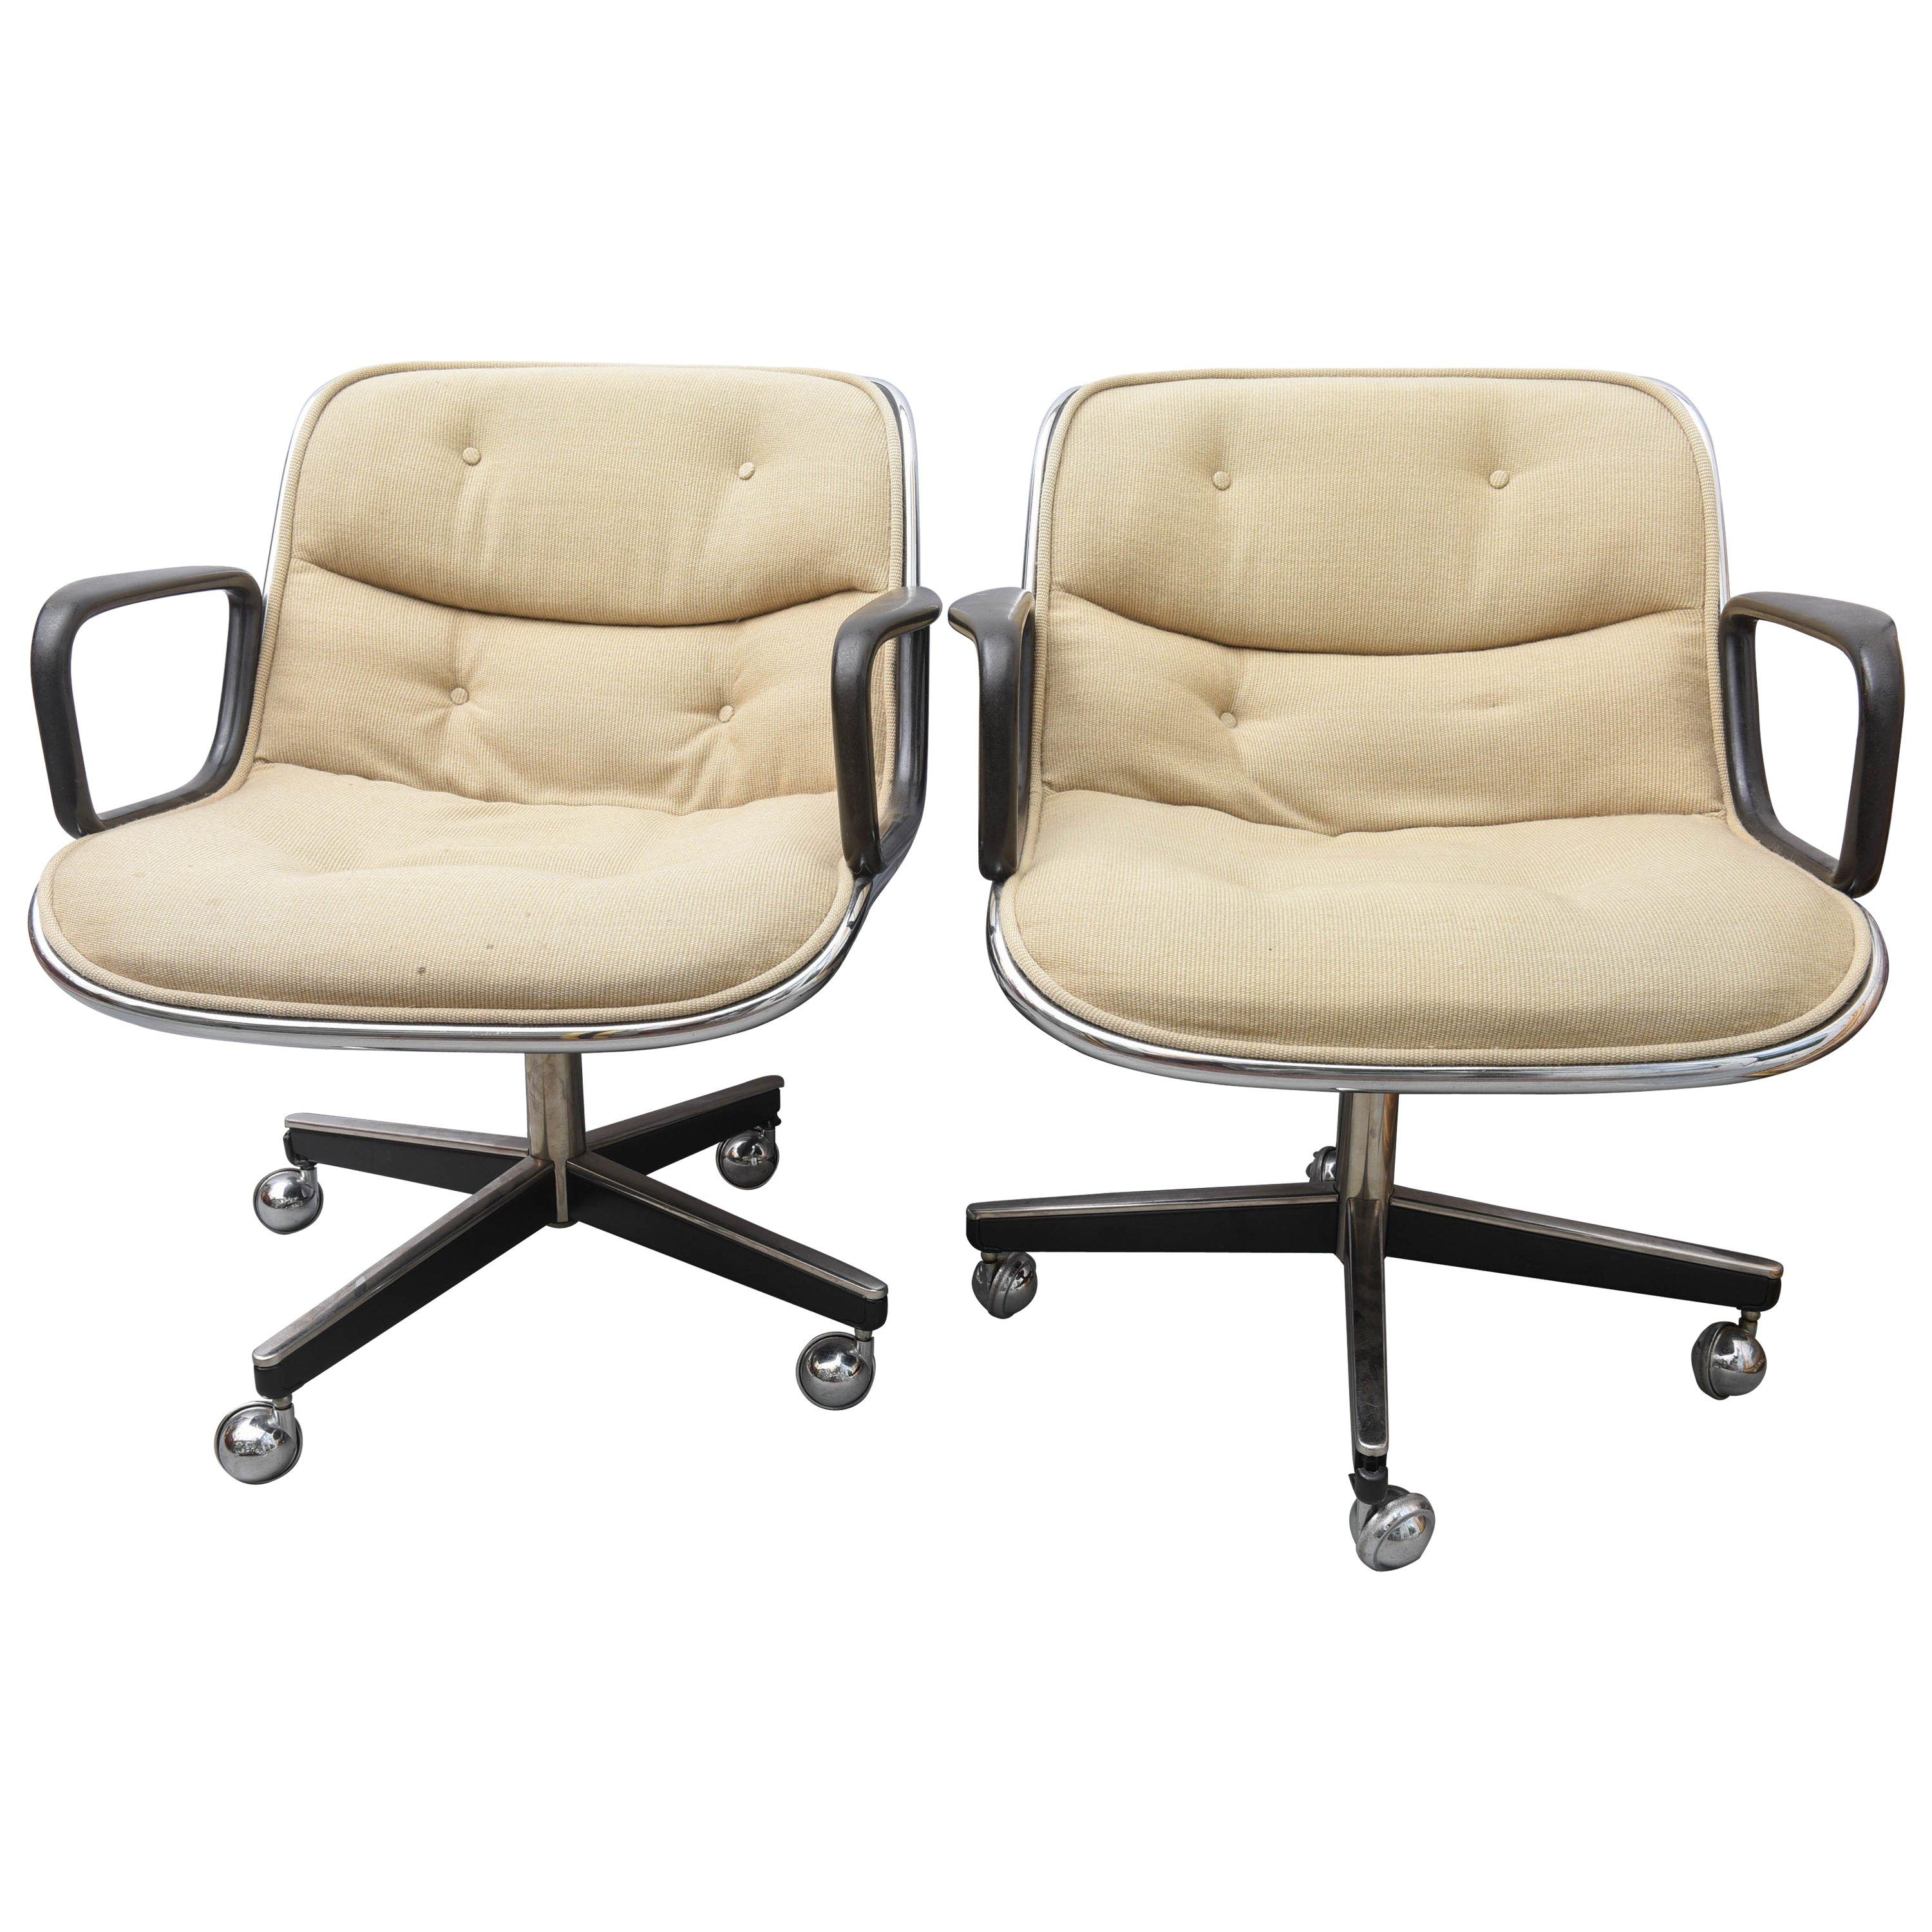 Pair of Charles Pollock for Knoll Executive Chairs, 1970s USA